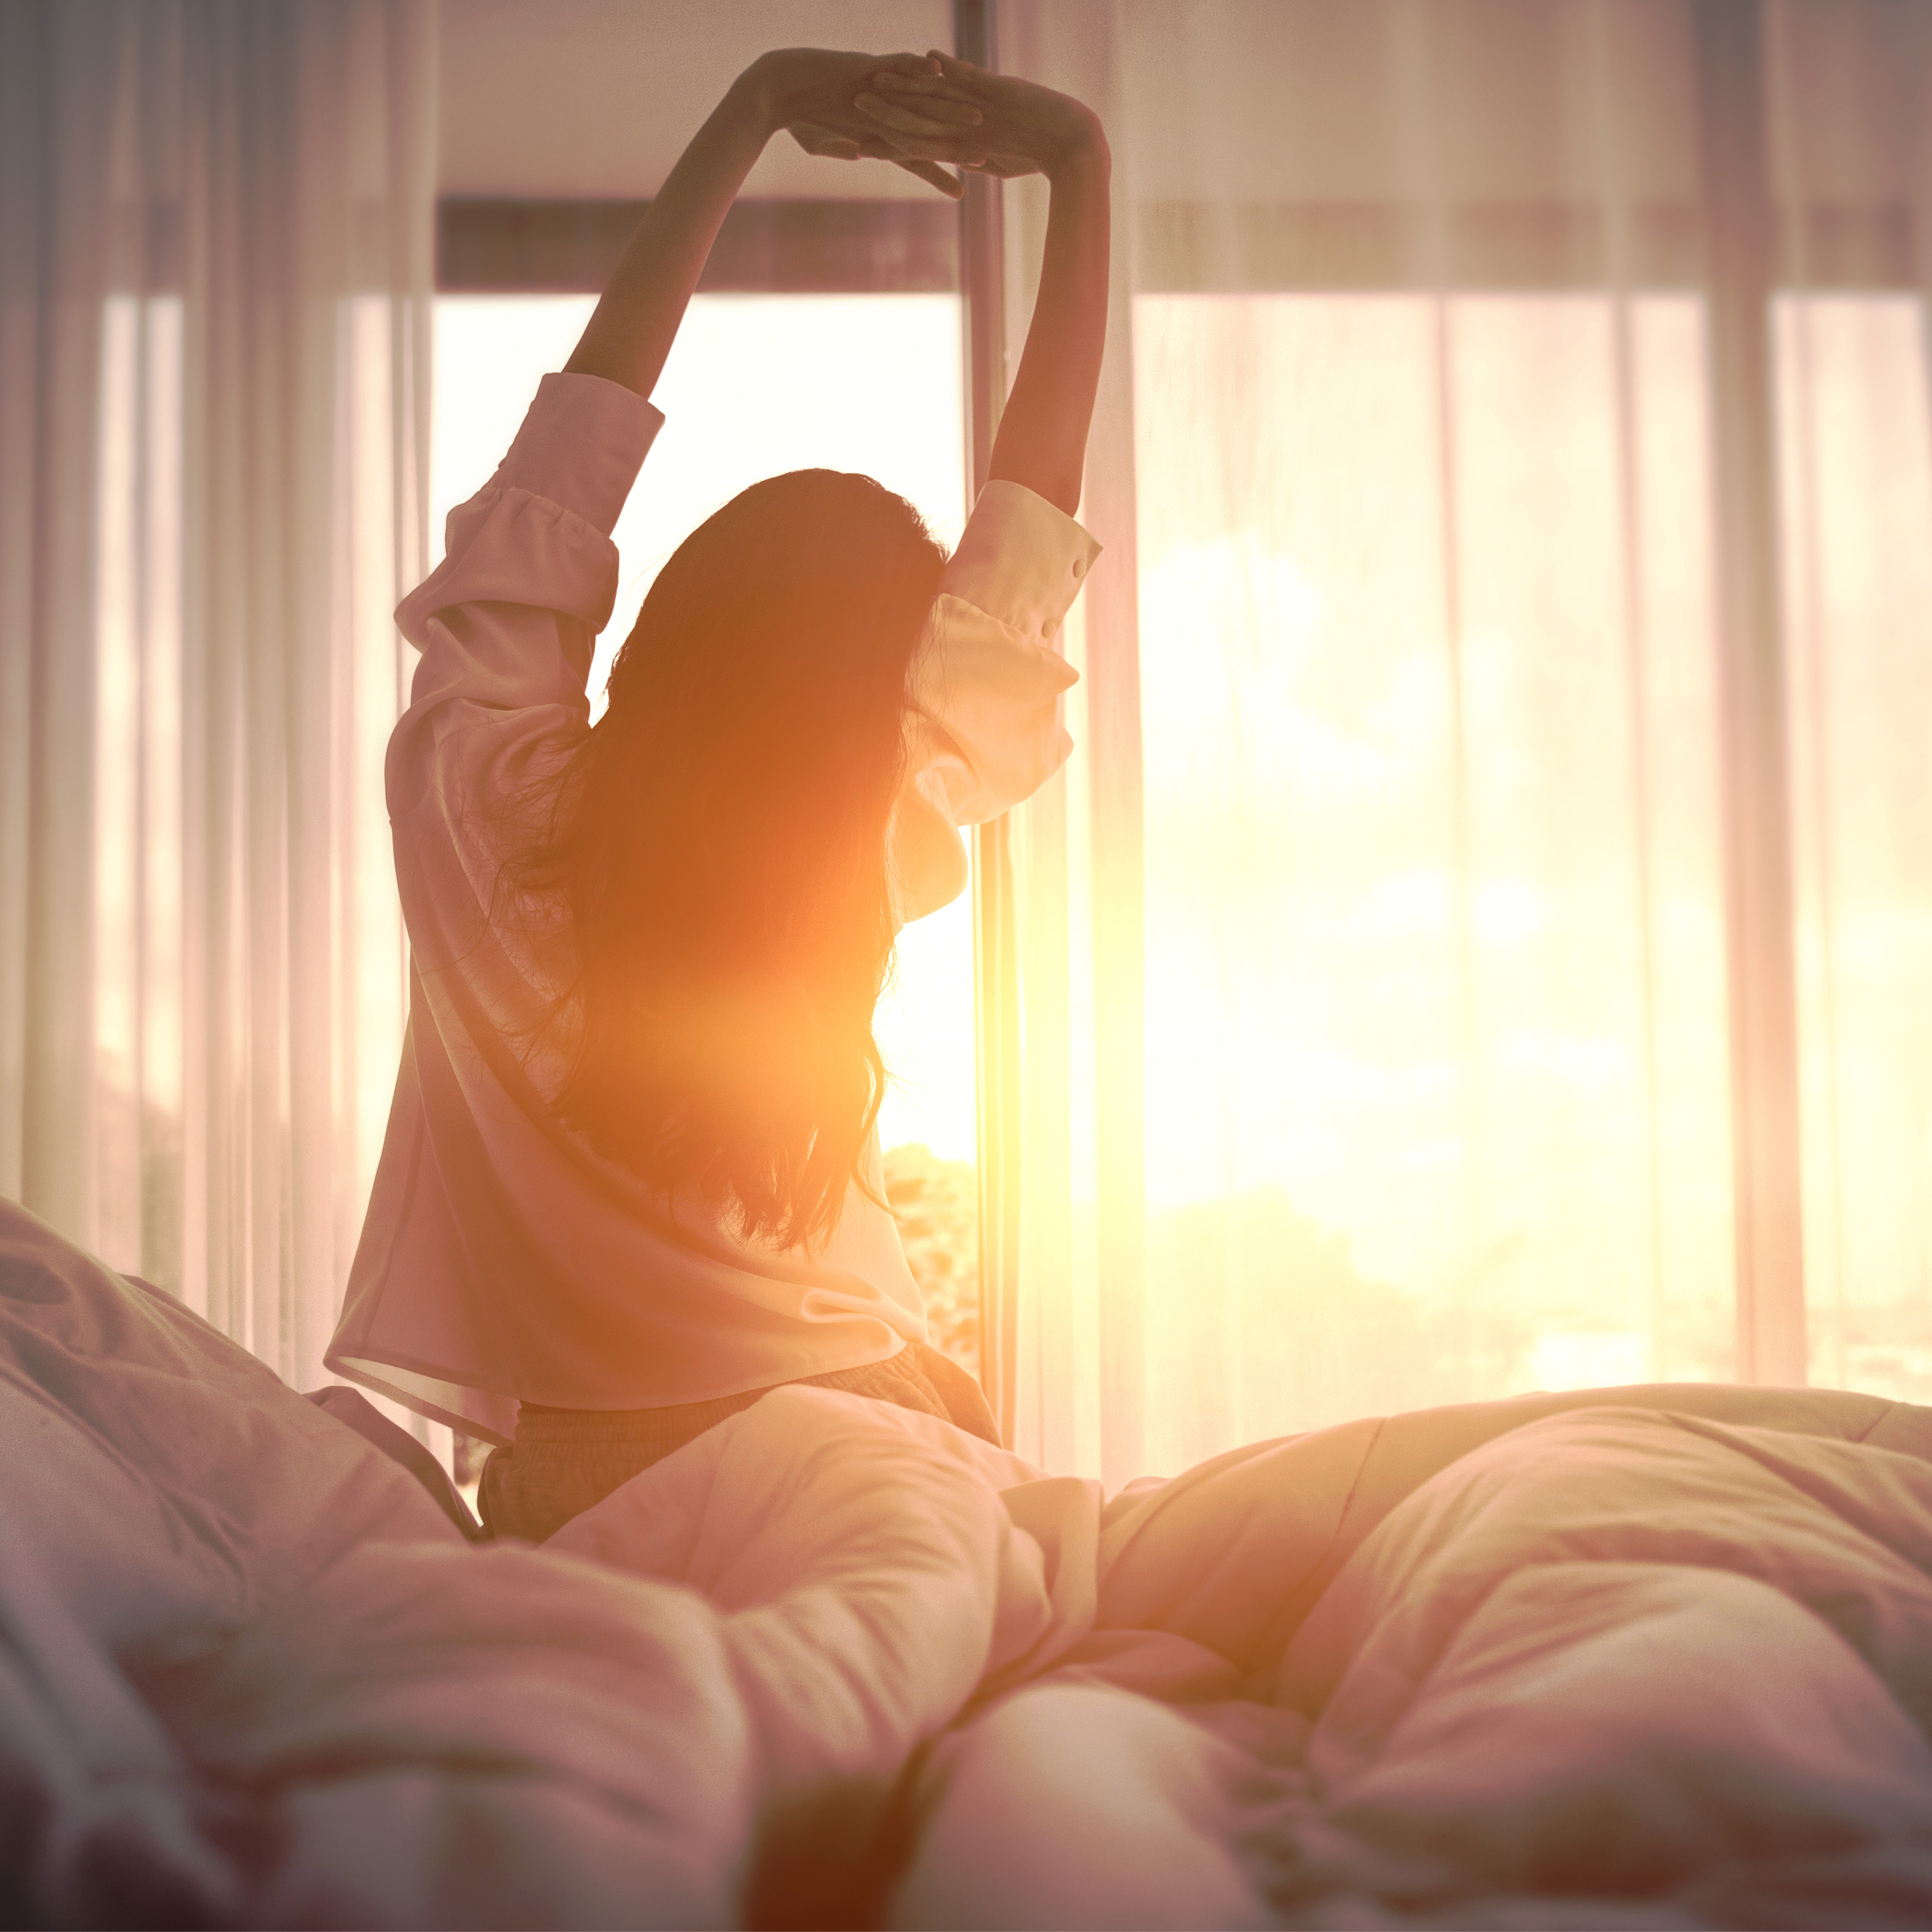 Woman during morning routine